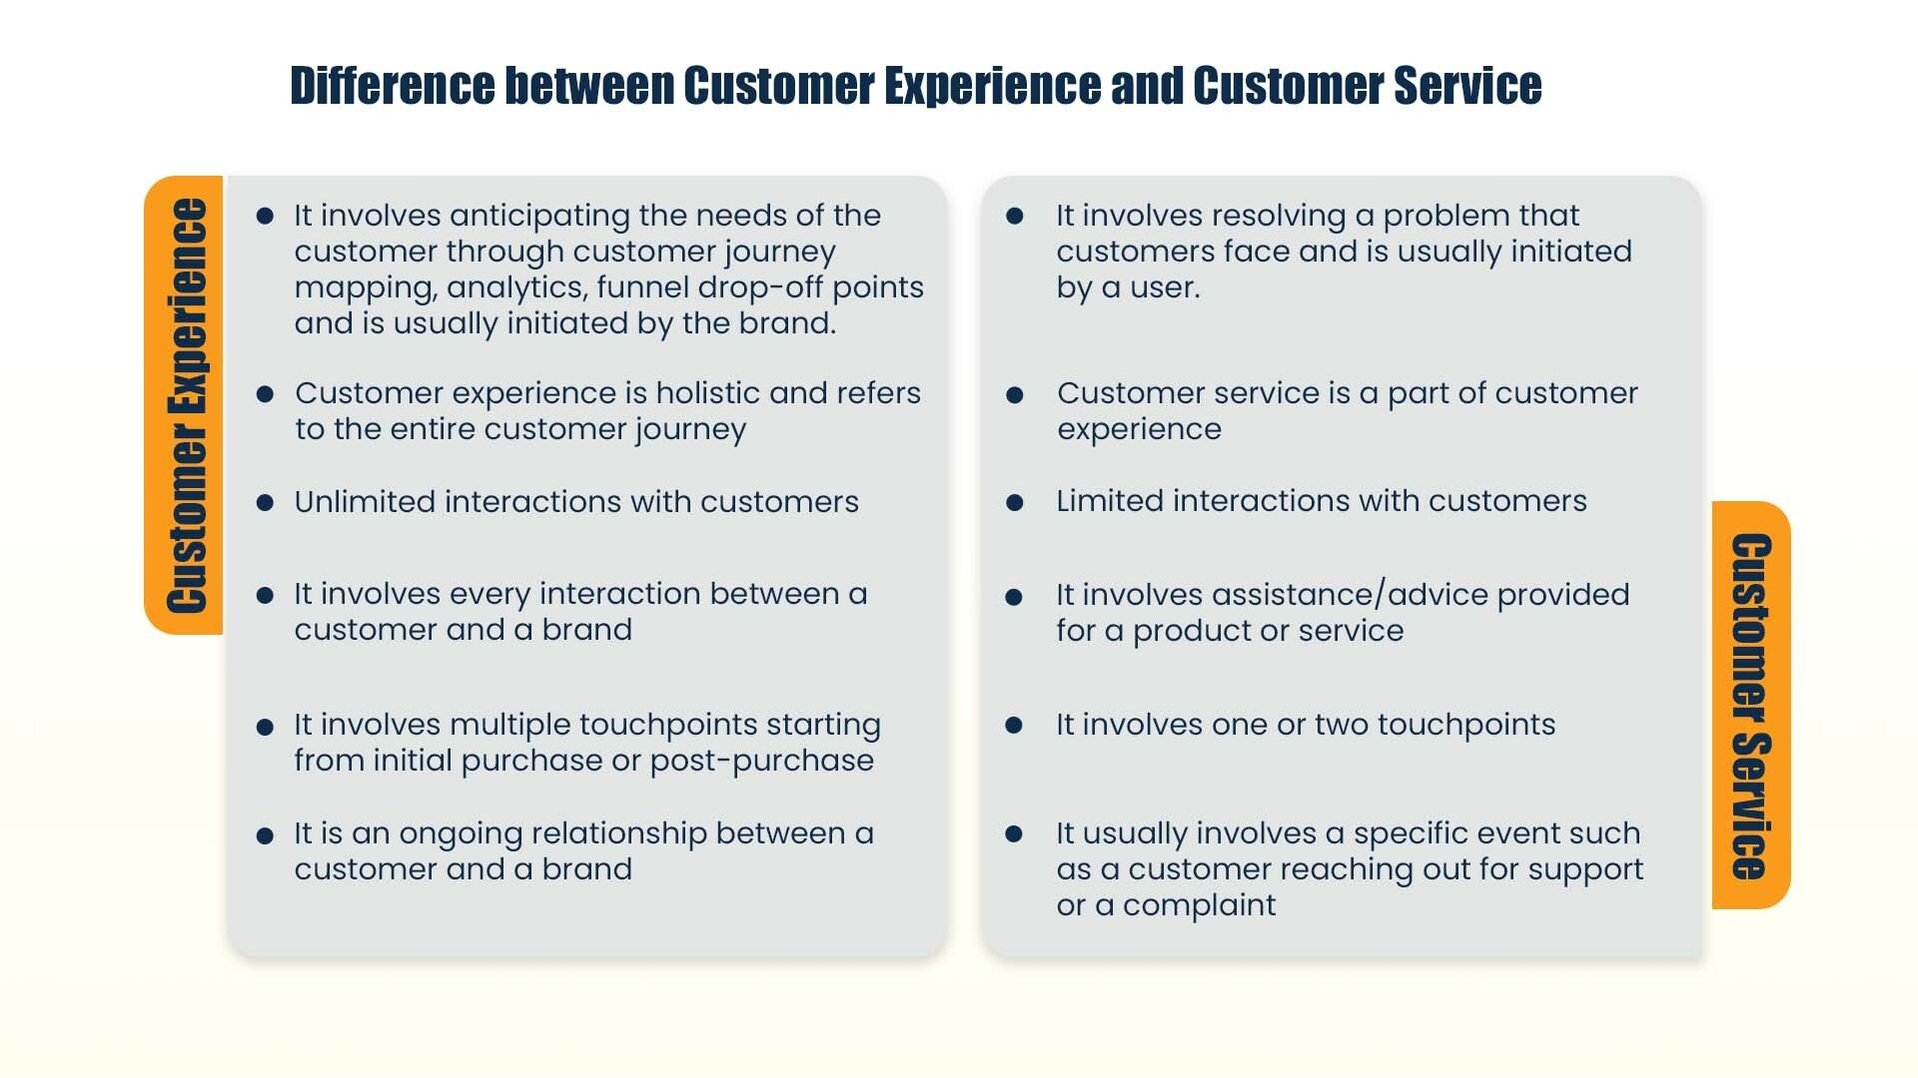 Difference between customer experience and customer service